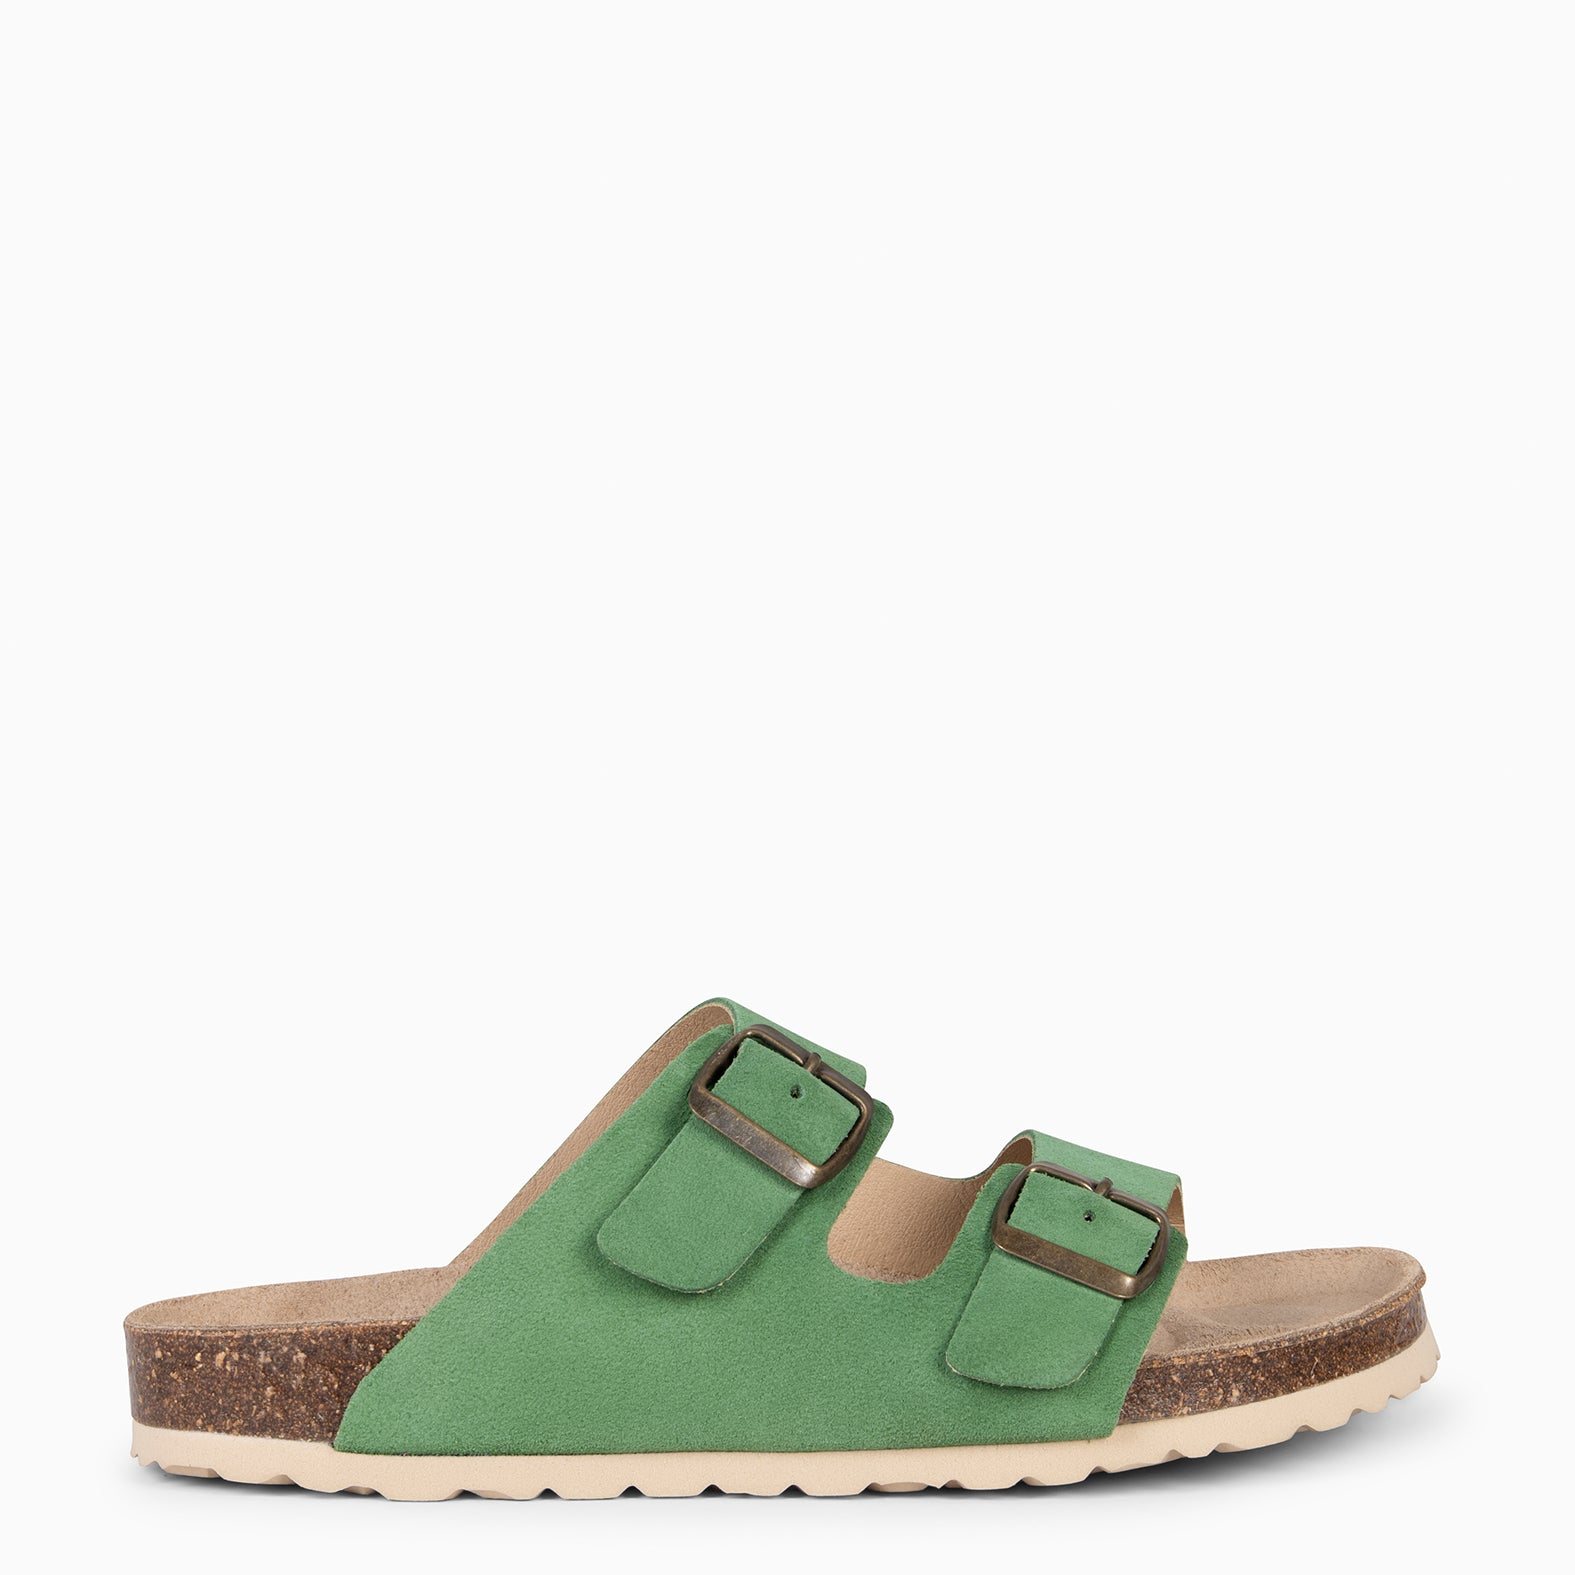 BORA - GREEN Flat sandal with double buckle